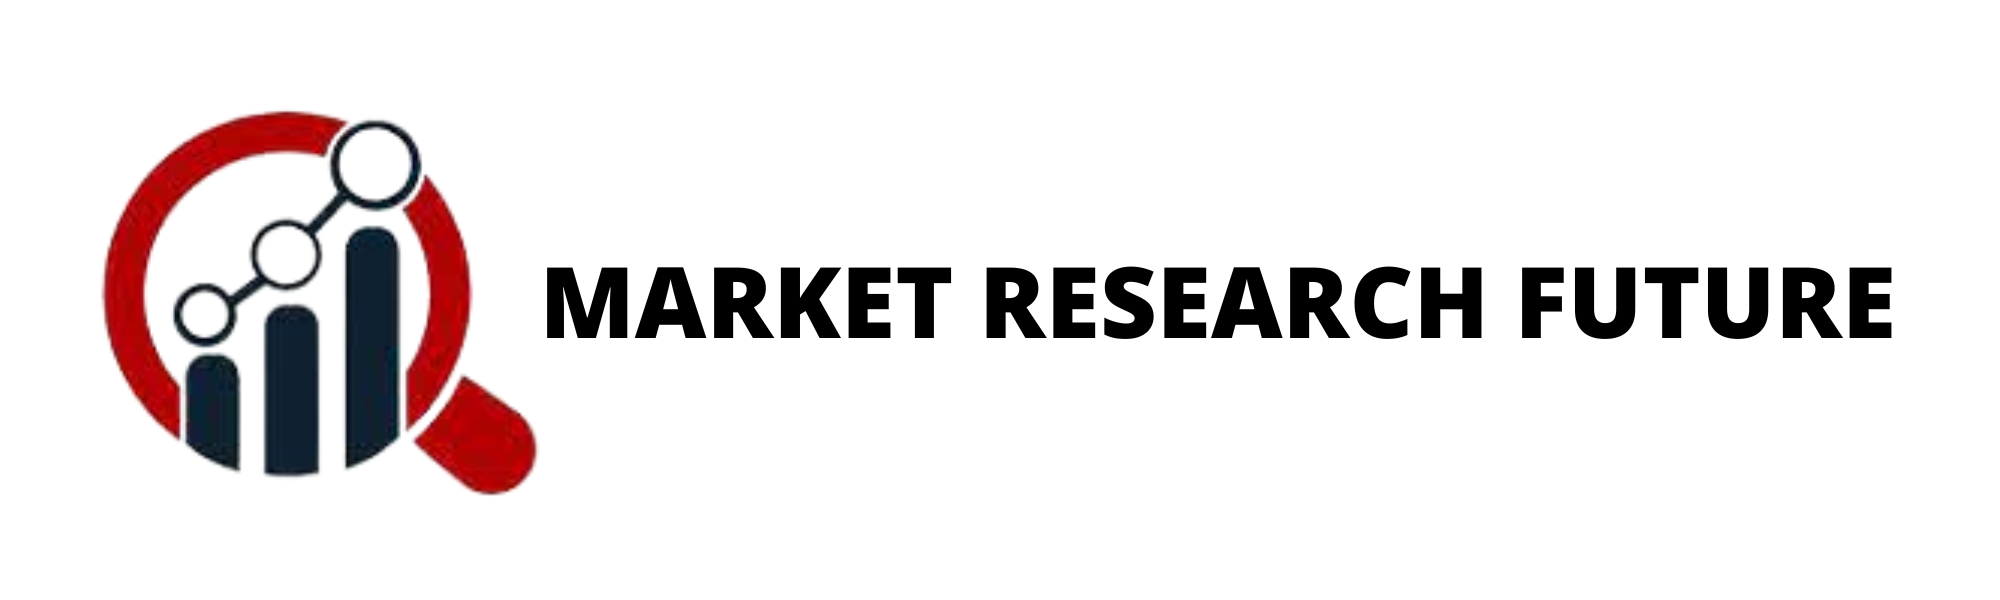 Metalworking Fluids Market Industry Covid-19 Impact: Key Players,...